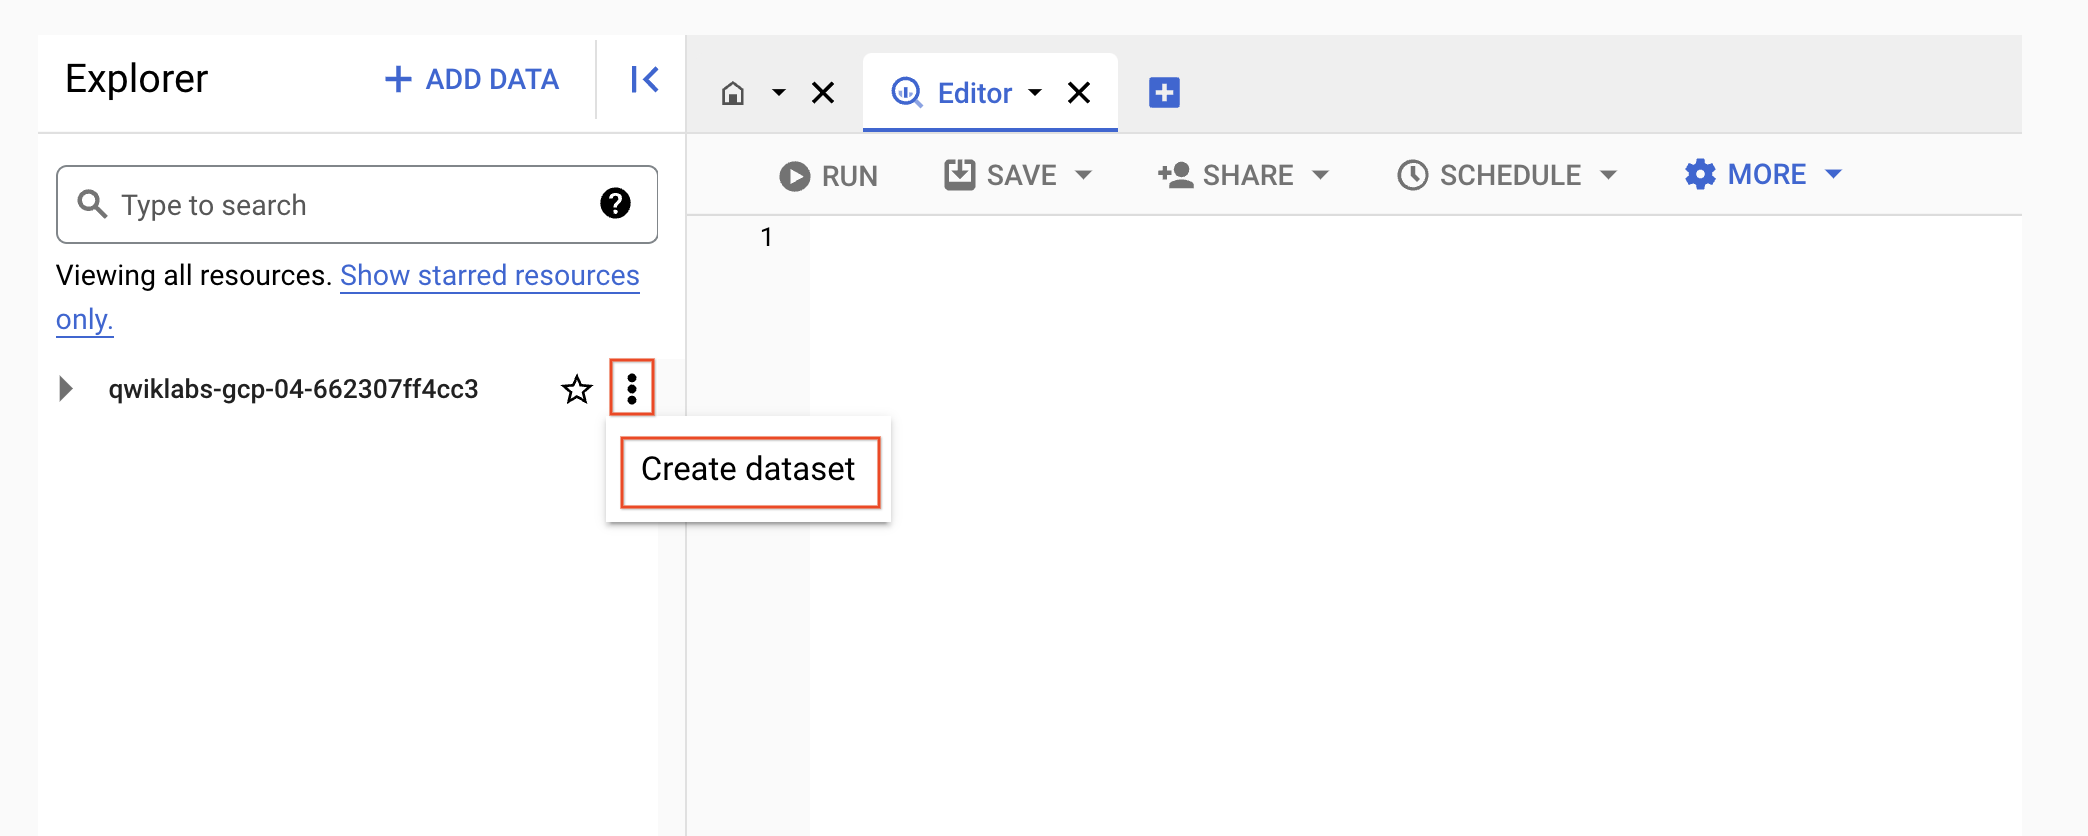 BigQuery console with the View actions icon and the Create dataset menu option highlighted